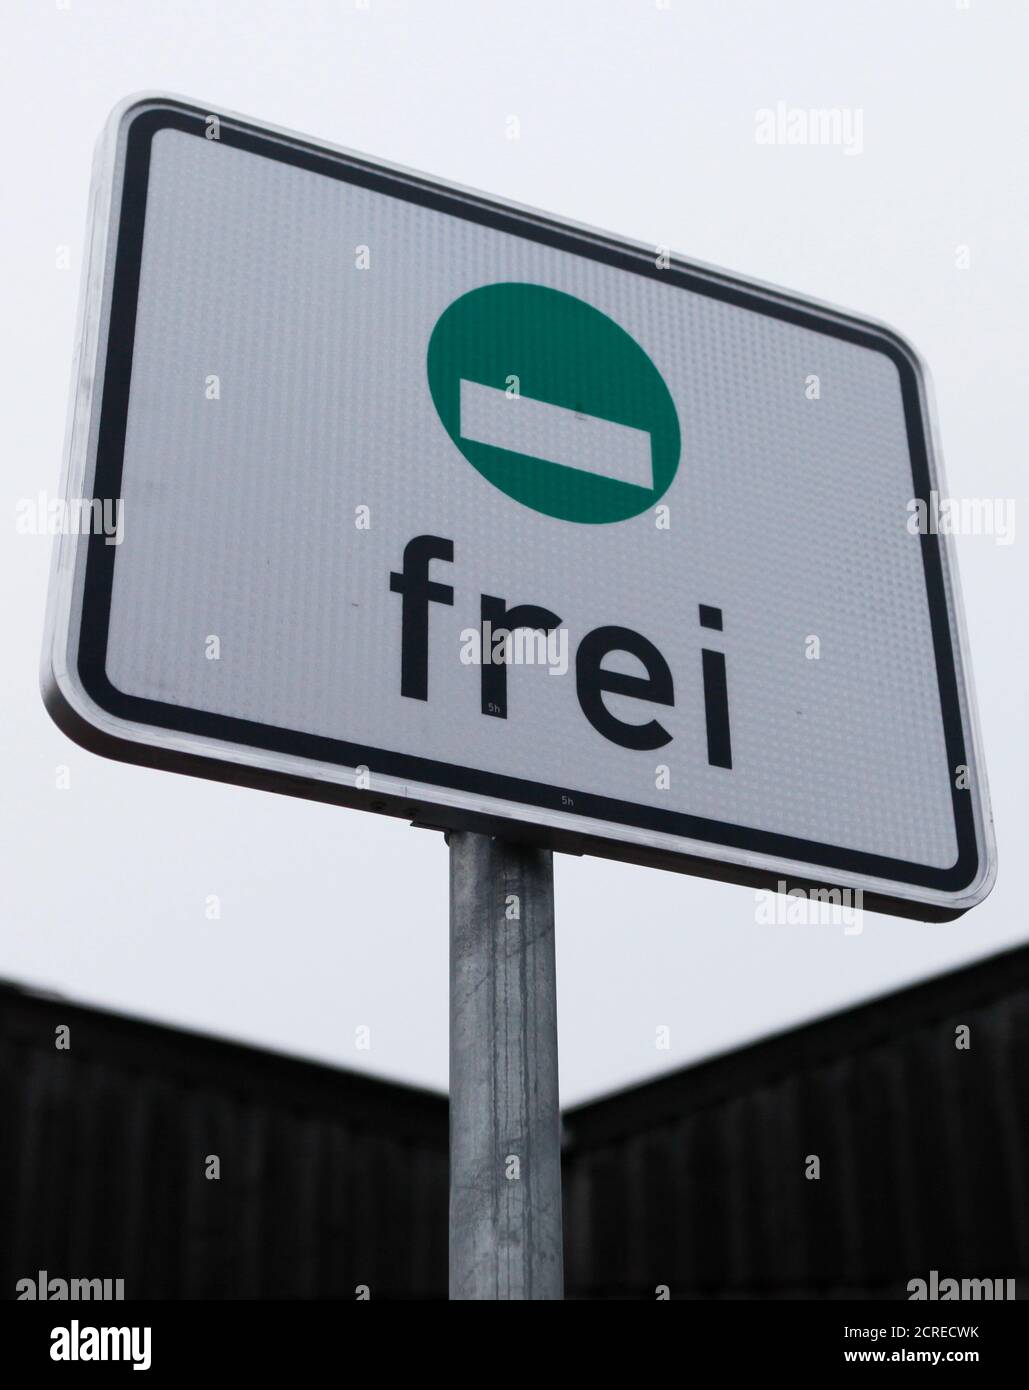 A traffic sign that is to mark the border of a low emission zone (Umweltzone) is seen in the yard of a road maintenance firm before being put up in Berlin  December 29, 2009.  REUTERS/Thomas Peter  (GERMANY - Tags: TRANSPORT ENVIRONMENT) Stock Photo